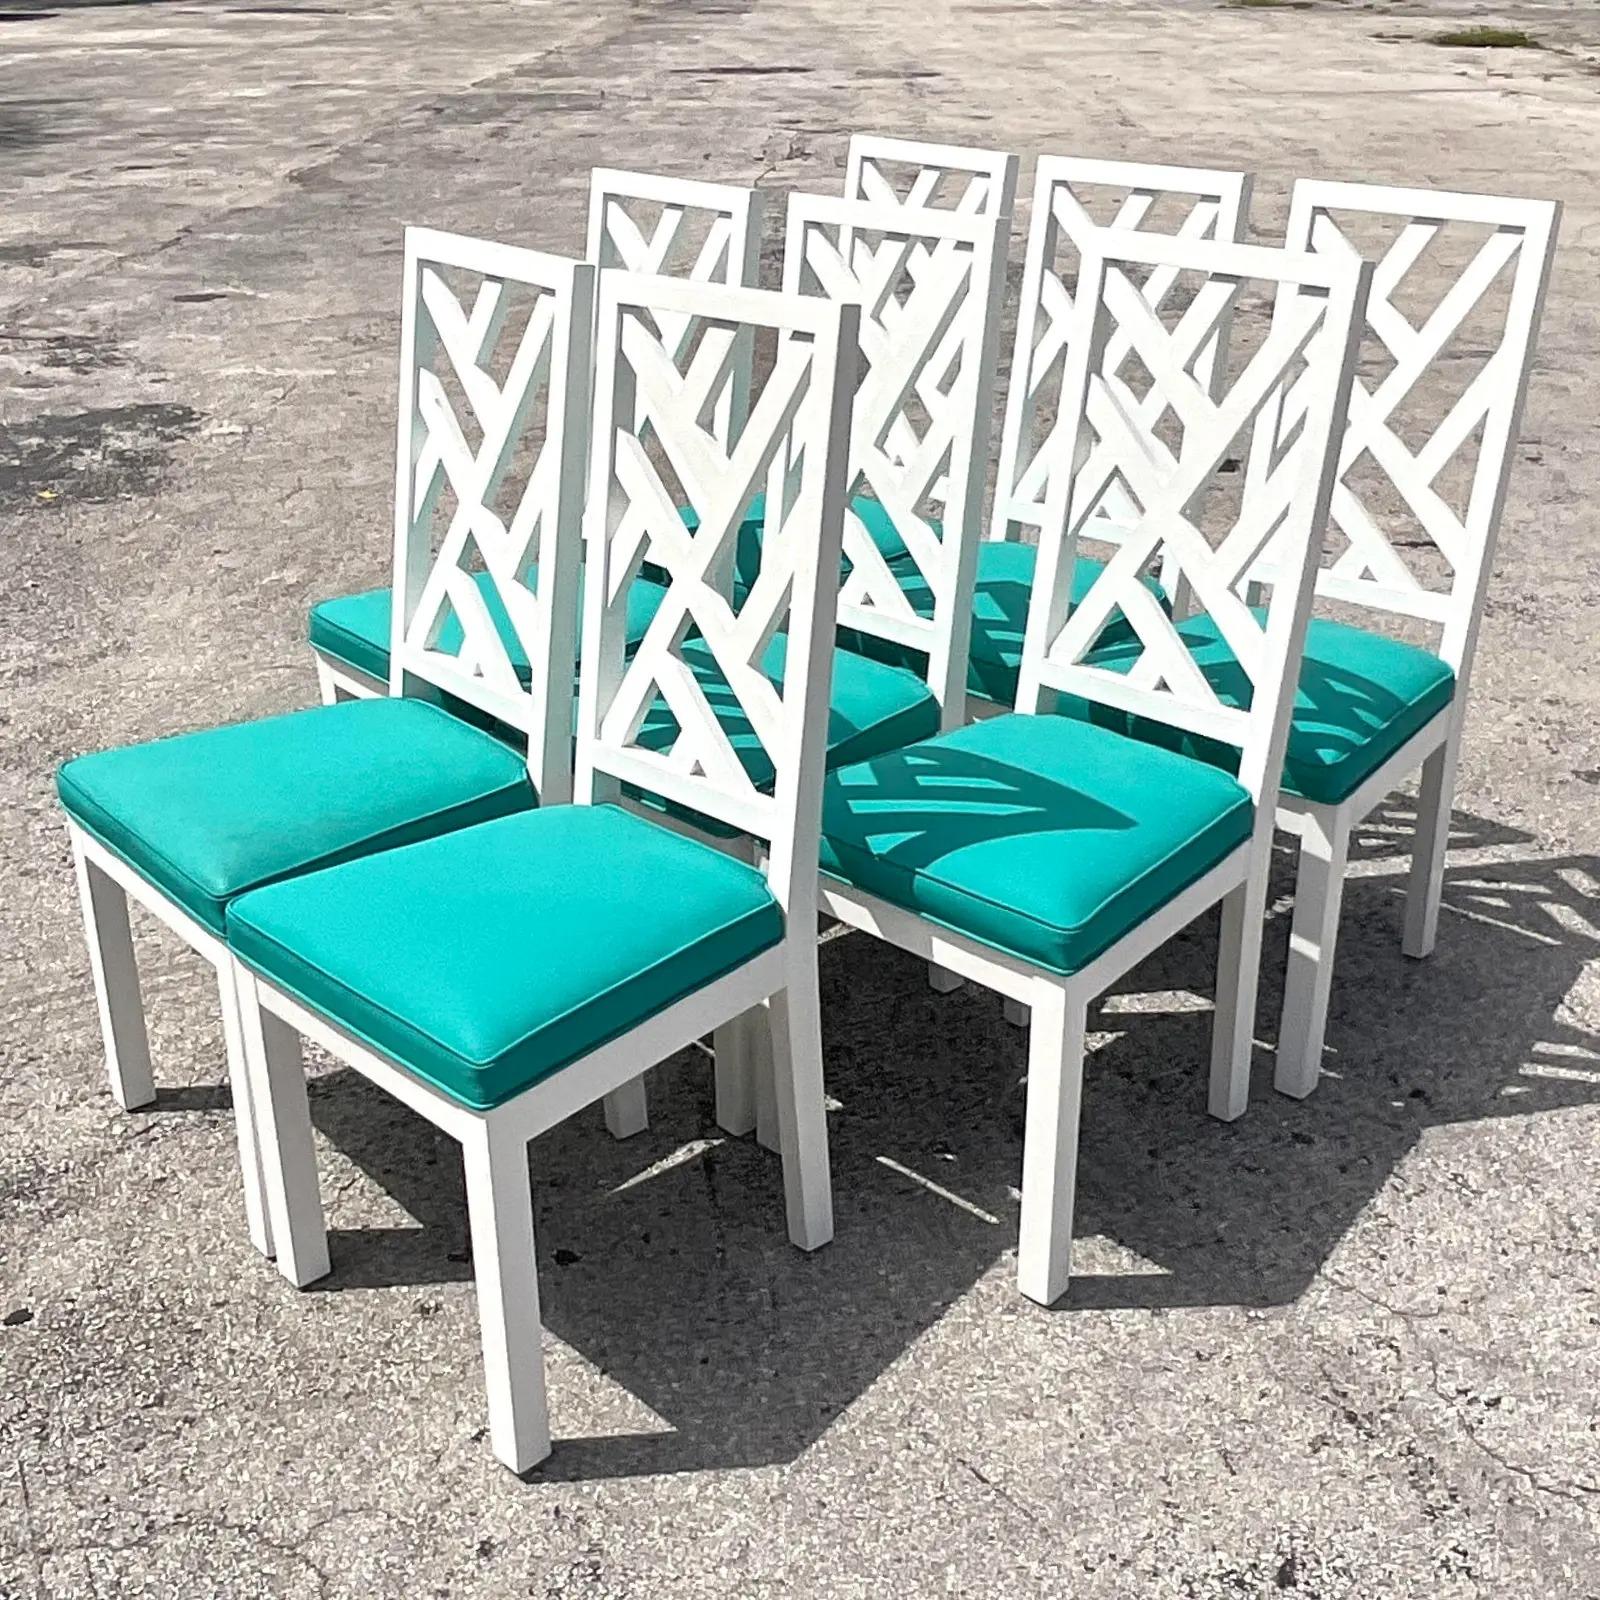 Fabulous set of 8 vintage Coastal dining chairs. Chic white lacquered finish on a Chinese Chippendale design. Attached bright teal blue seats with welting trim. 

The chairs are in great vintage condition. Minor scuffs and blemishes appropriate to